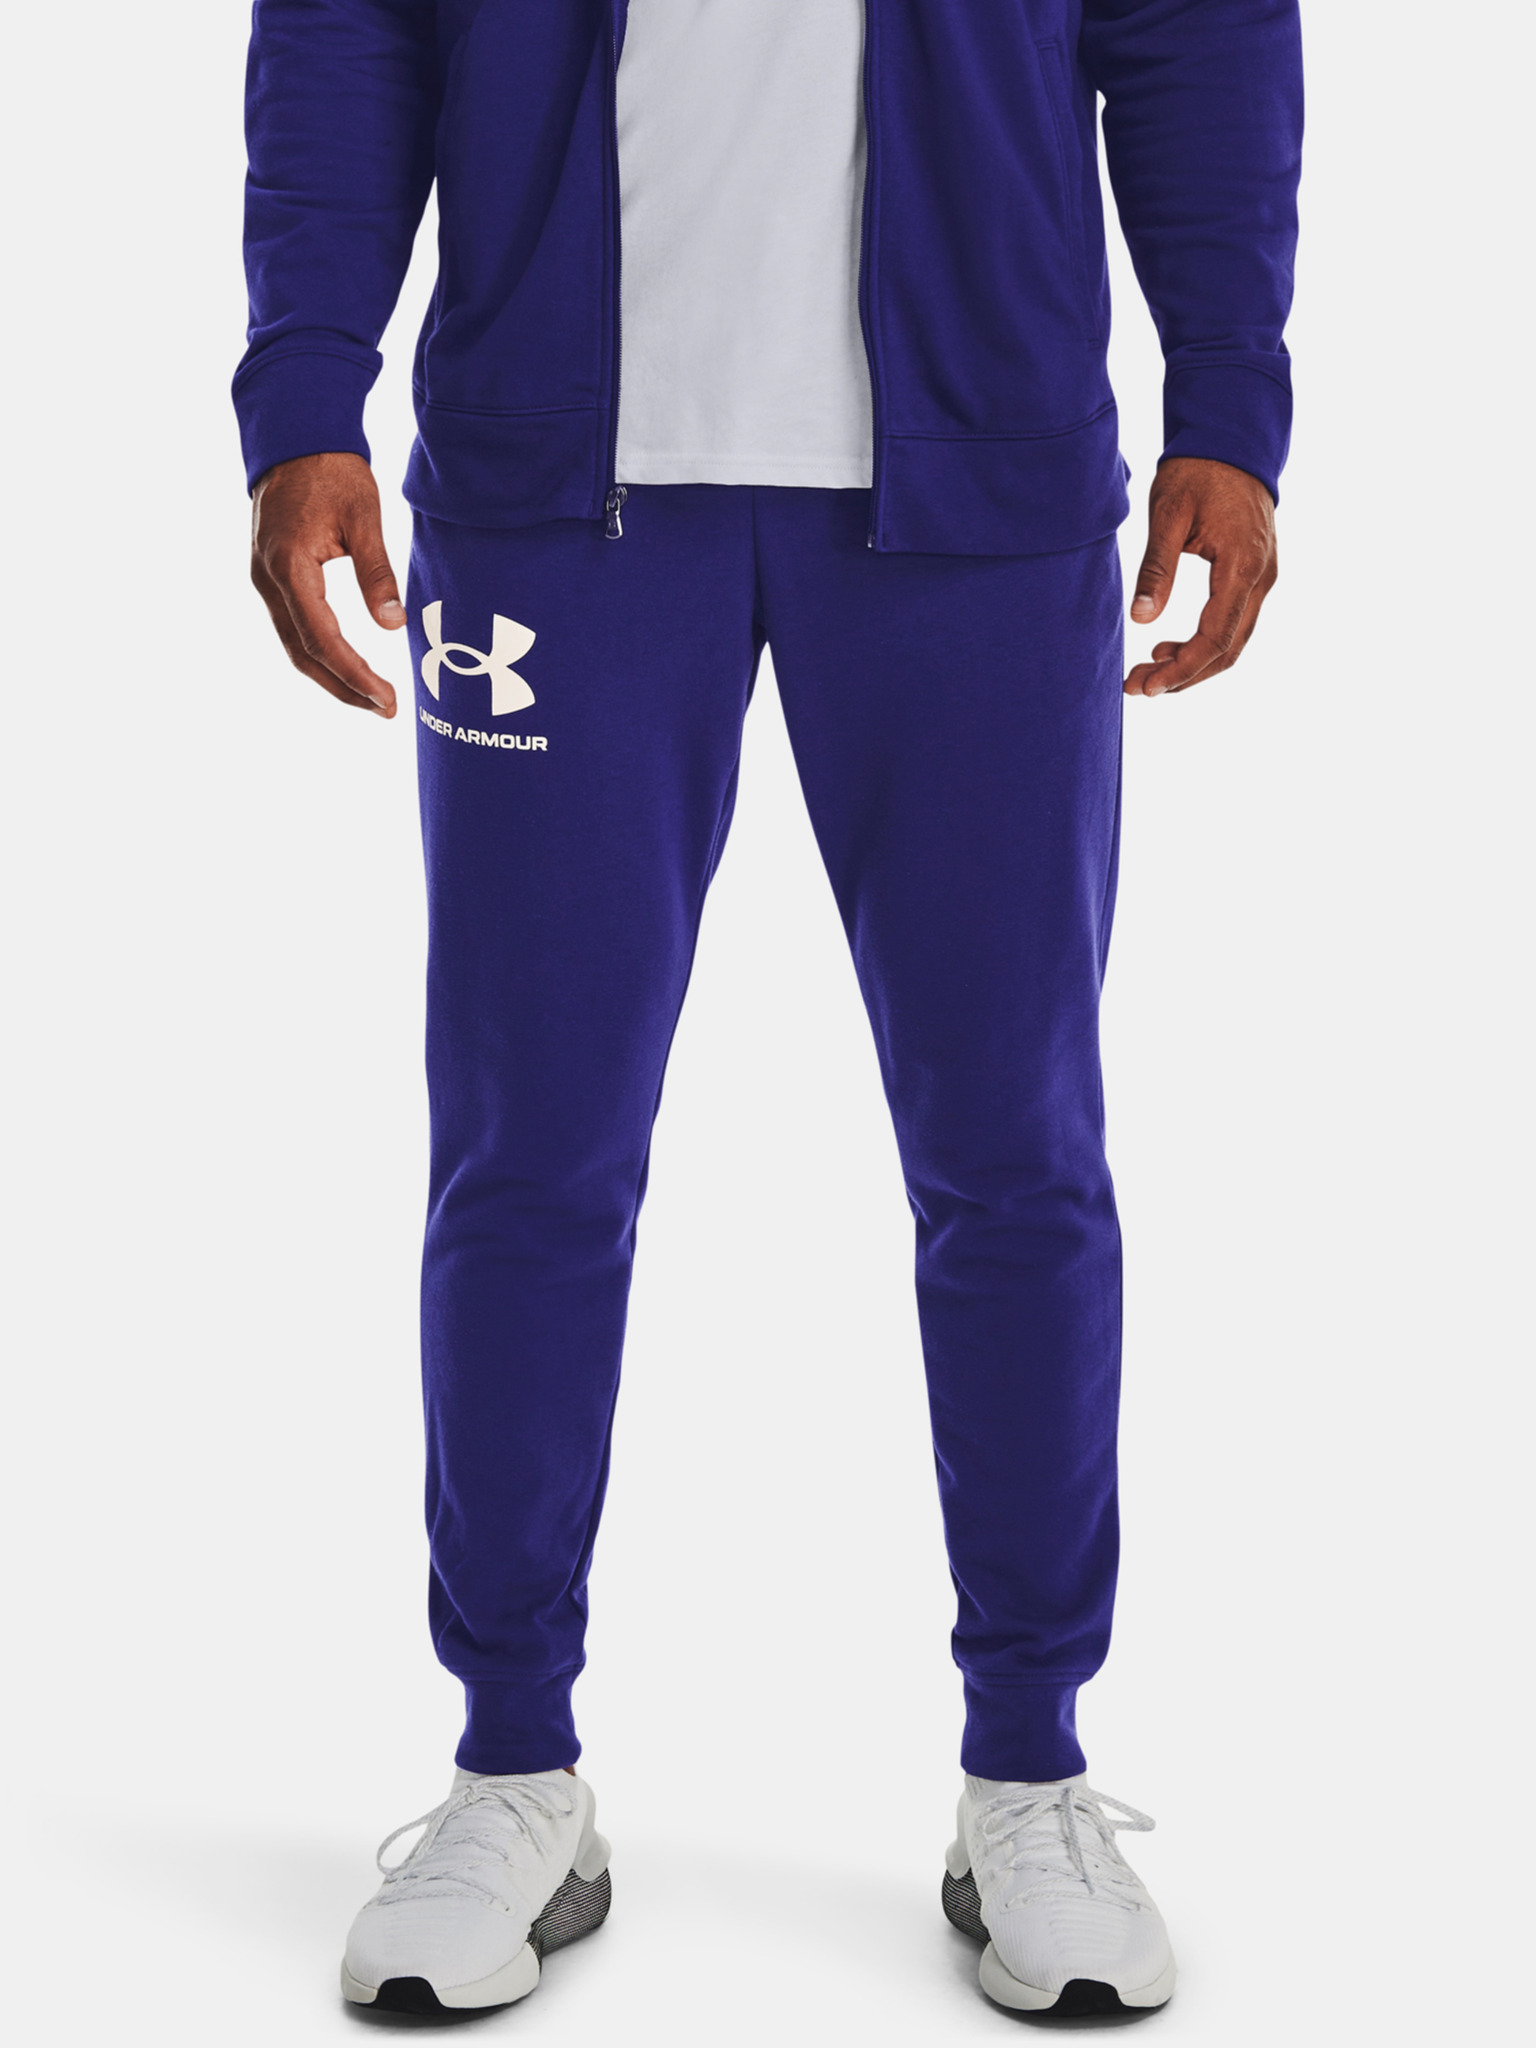 Under Armour - UA Rival Terry Sweatpants